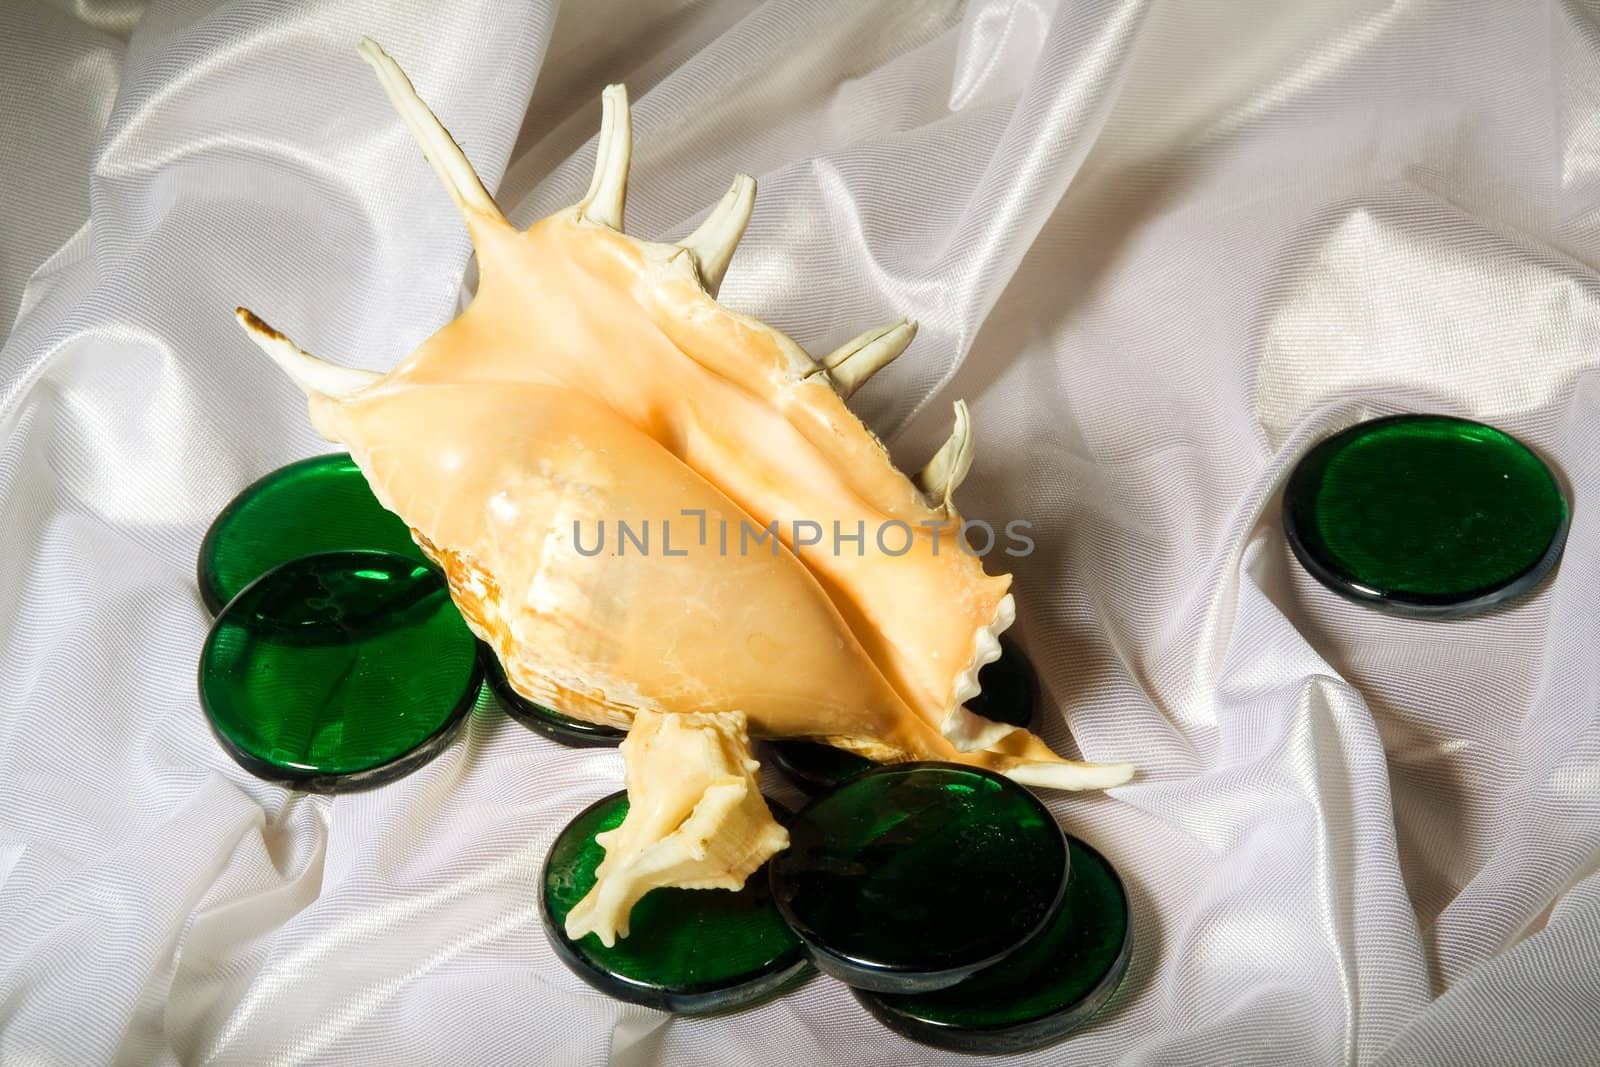 Sea shells and green decorative glass among the folds of a white textured fabric